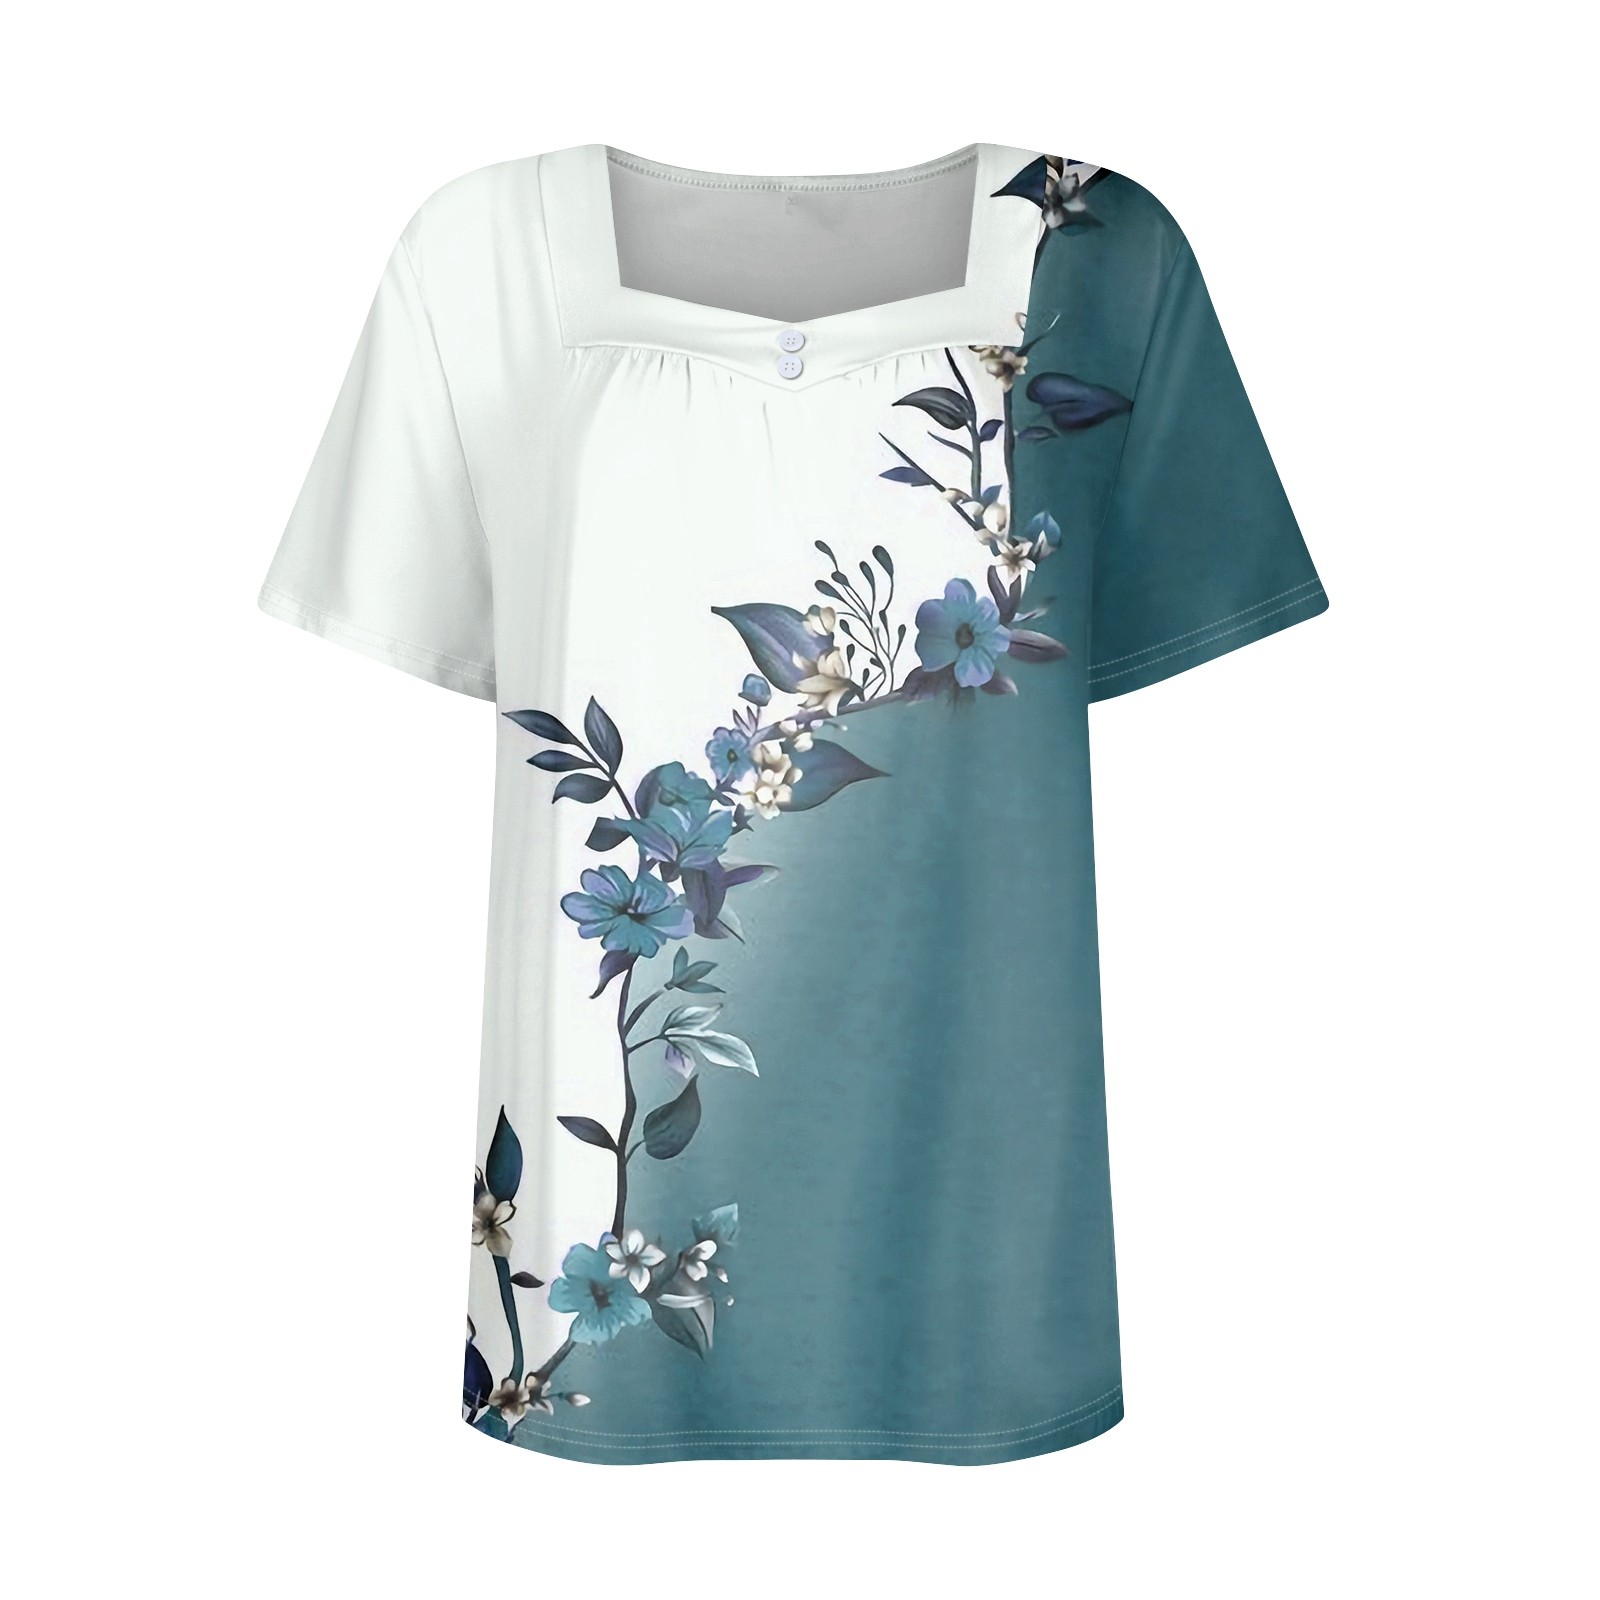 Ovticza T Shirts Short Square Neck Tees for Women Floral Print Retro ...